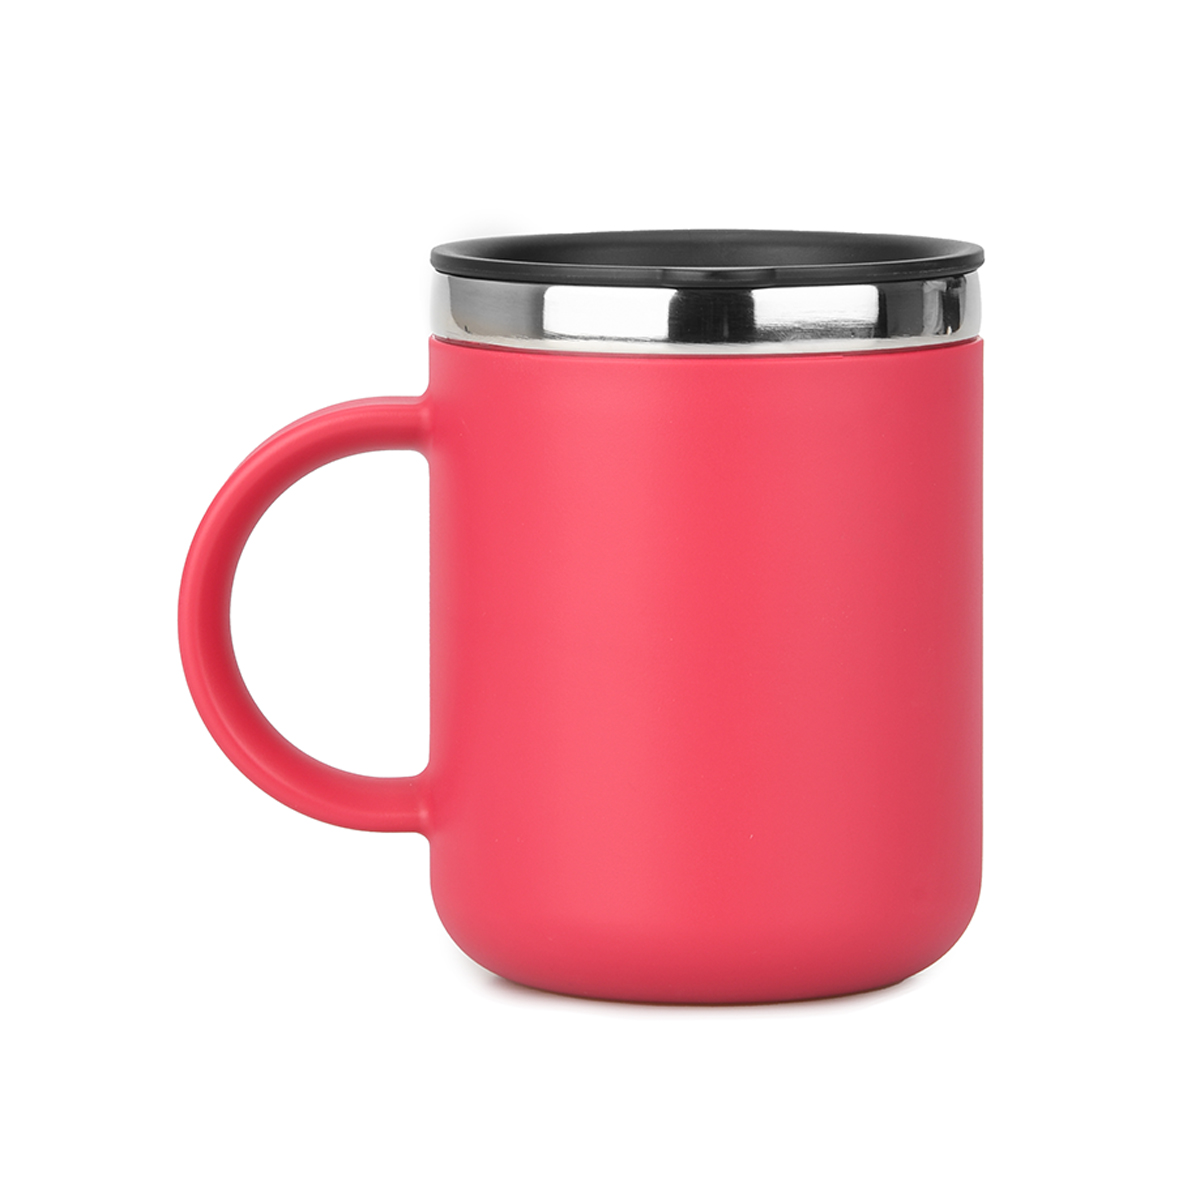 Taza Hydro Flask 12 Oz Coffee,  image number null